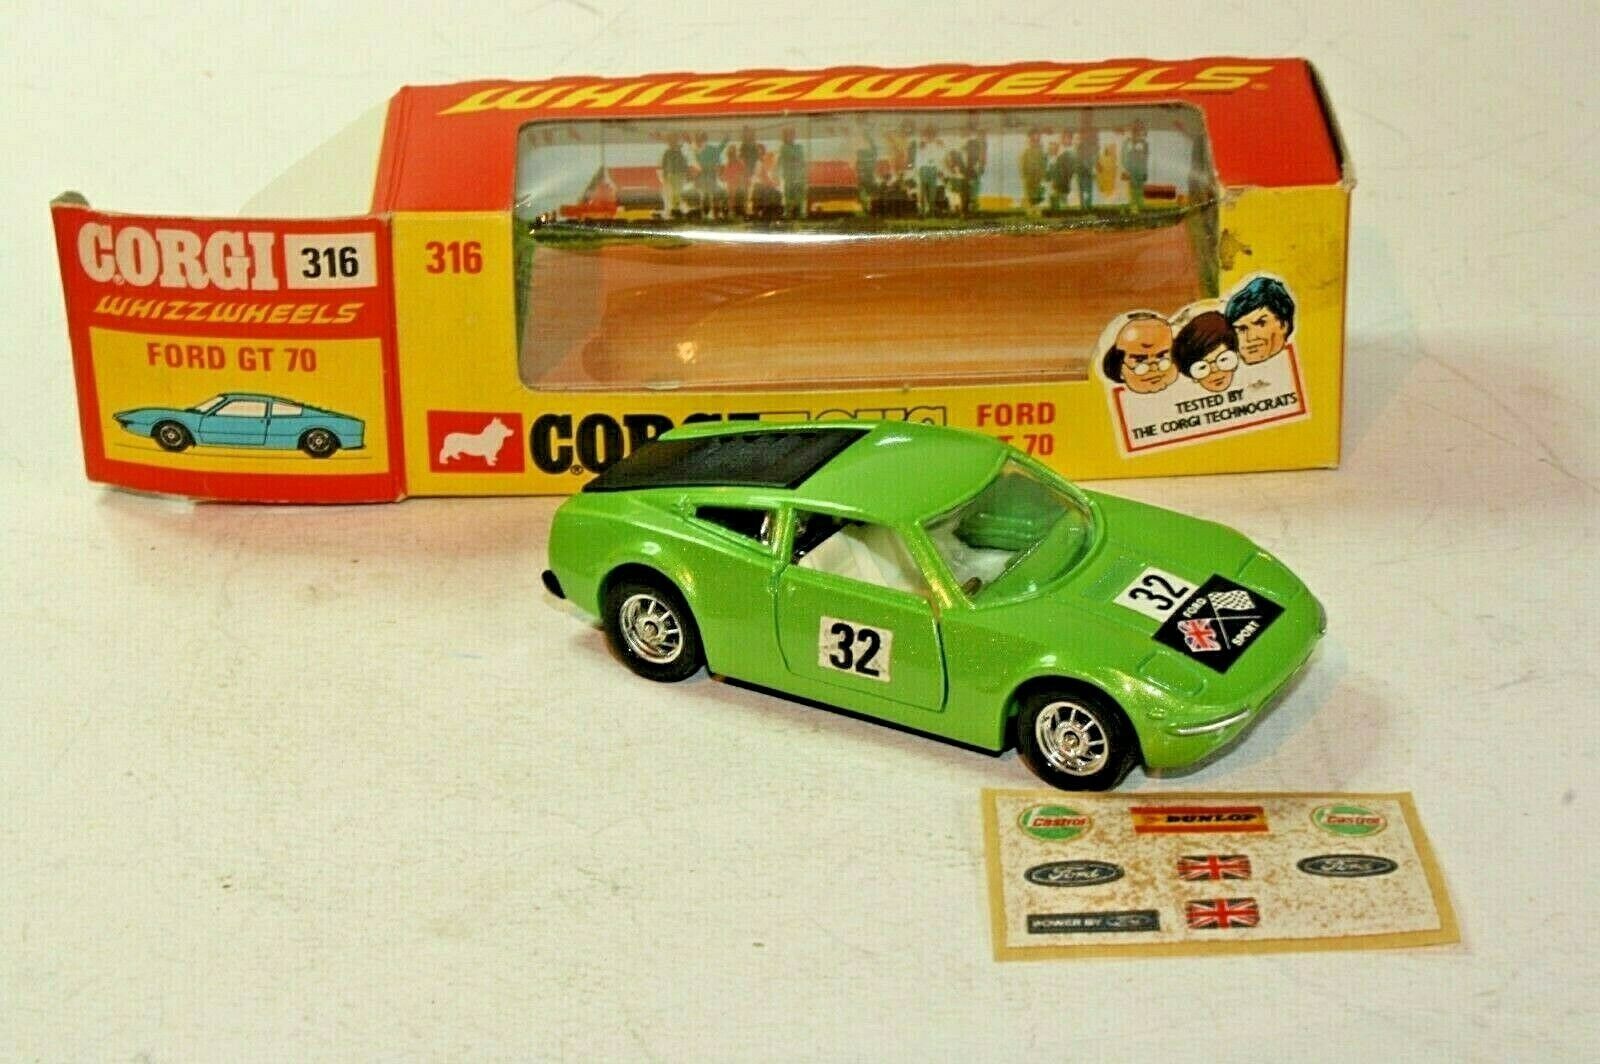 Corgi Whizzwheels 316 Ford GT70 decal set only 